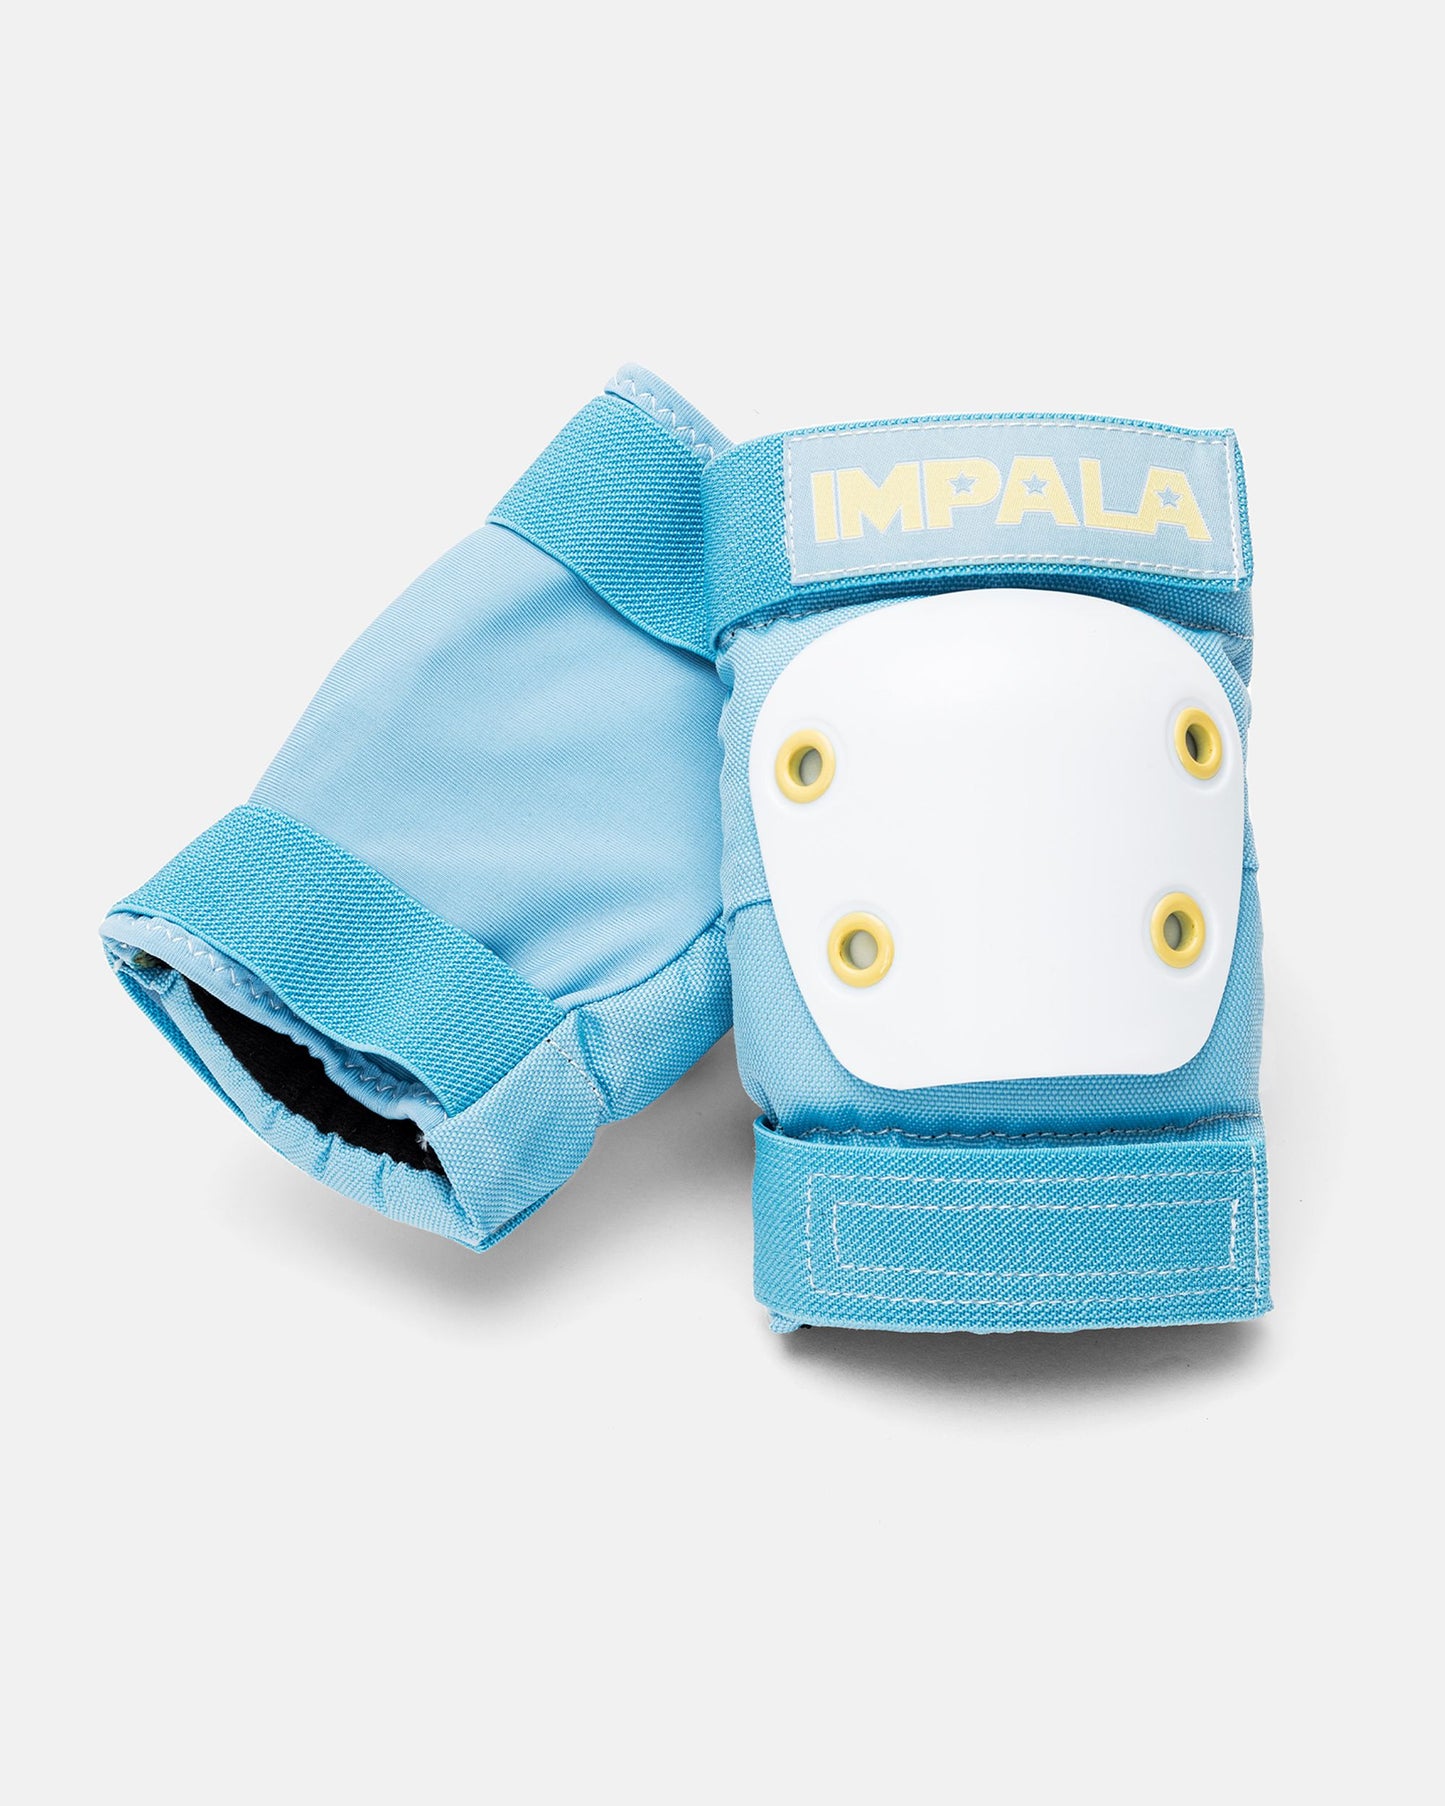 Elbow pads in the Impala Protective Set Youth - Sky Blue/Yellow